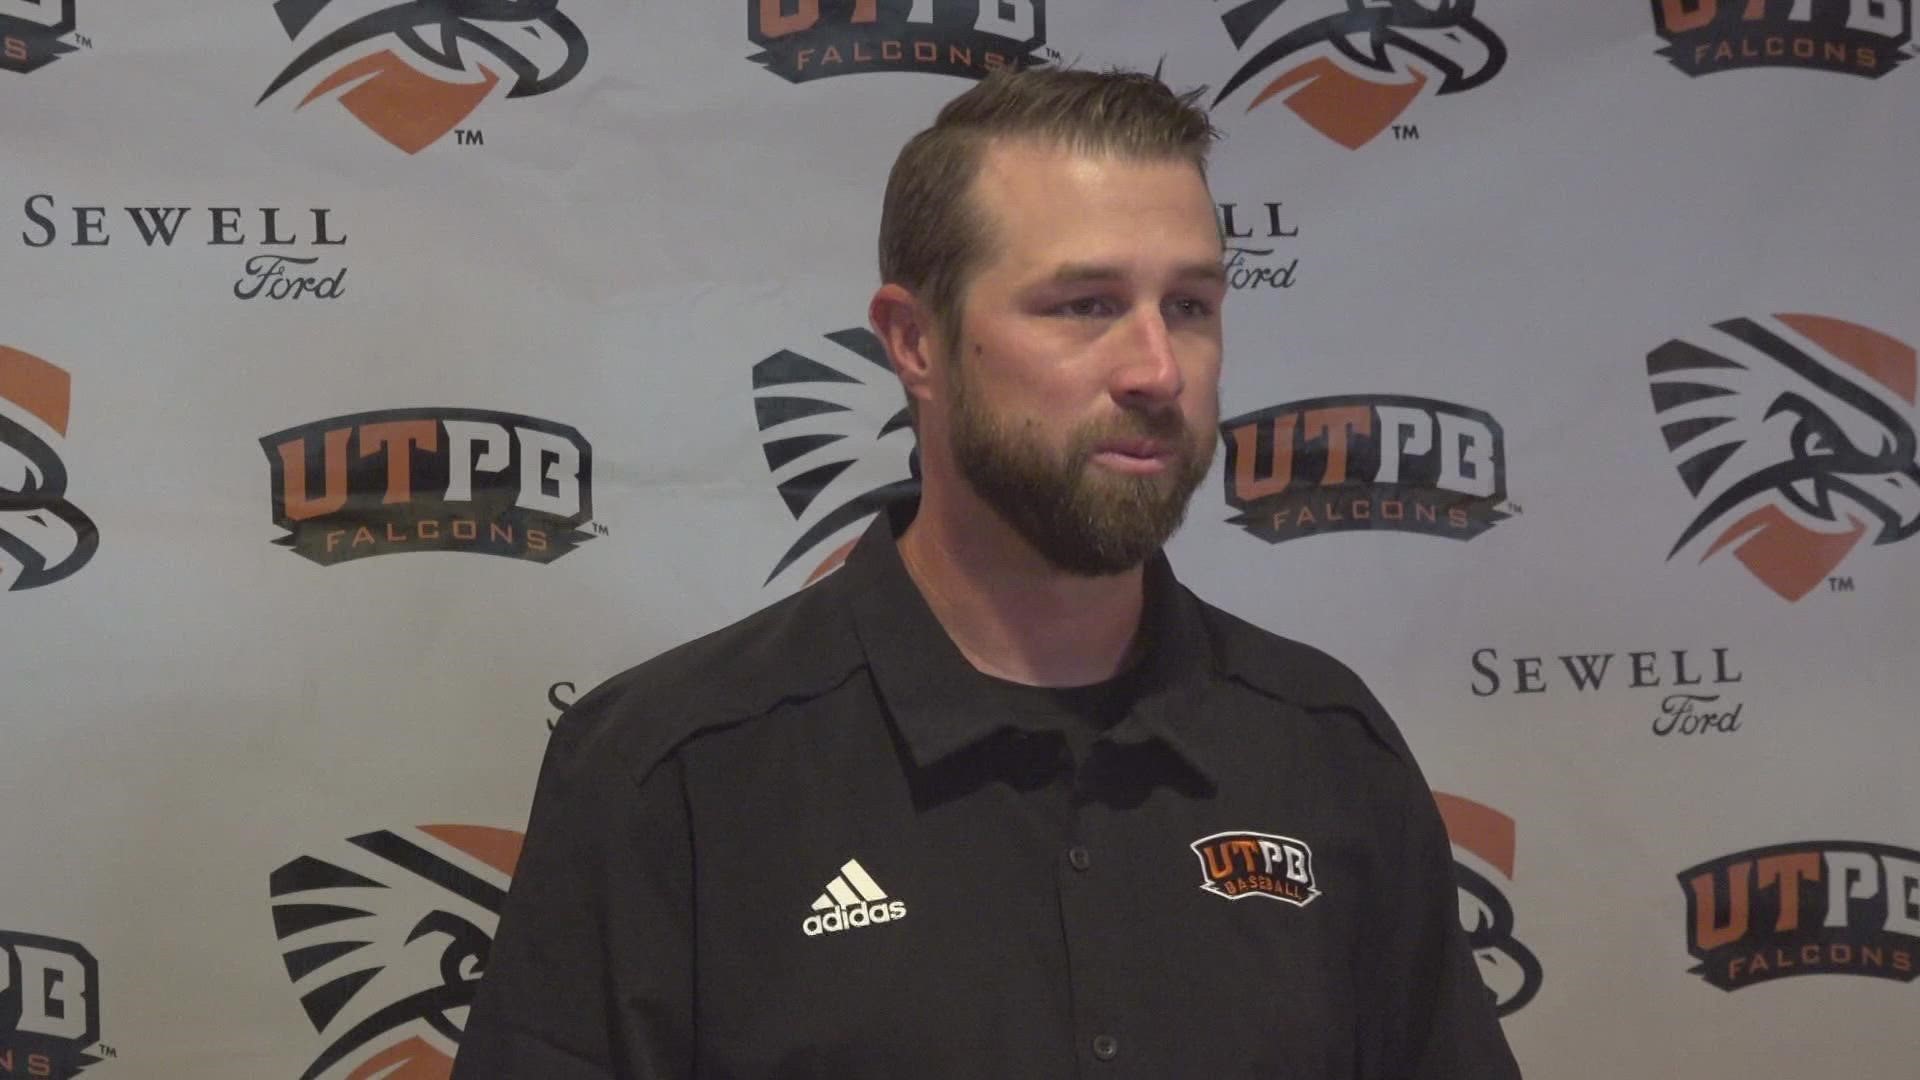 Grinder becomes the third manager in program history and joins UTPB from Ottawa University in Kansas